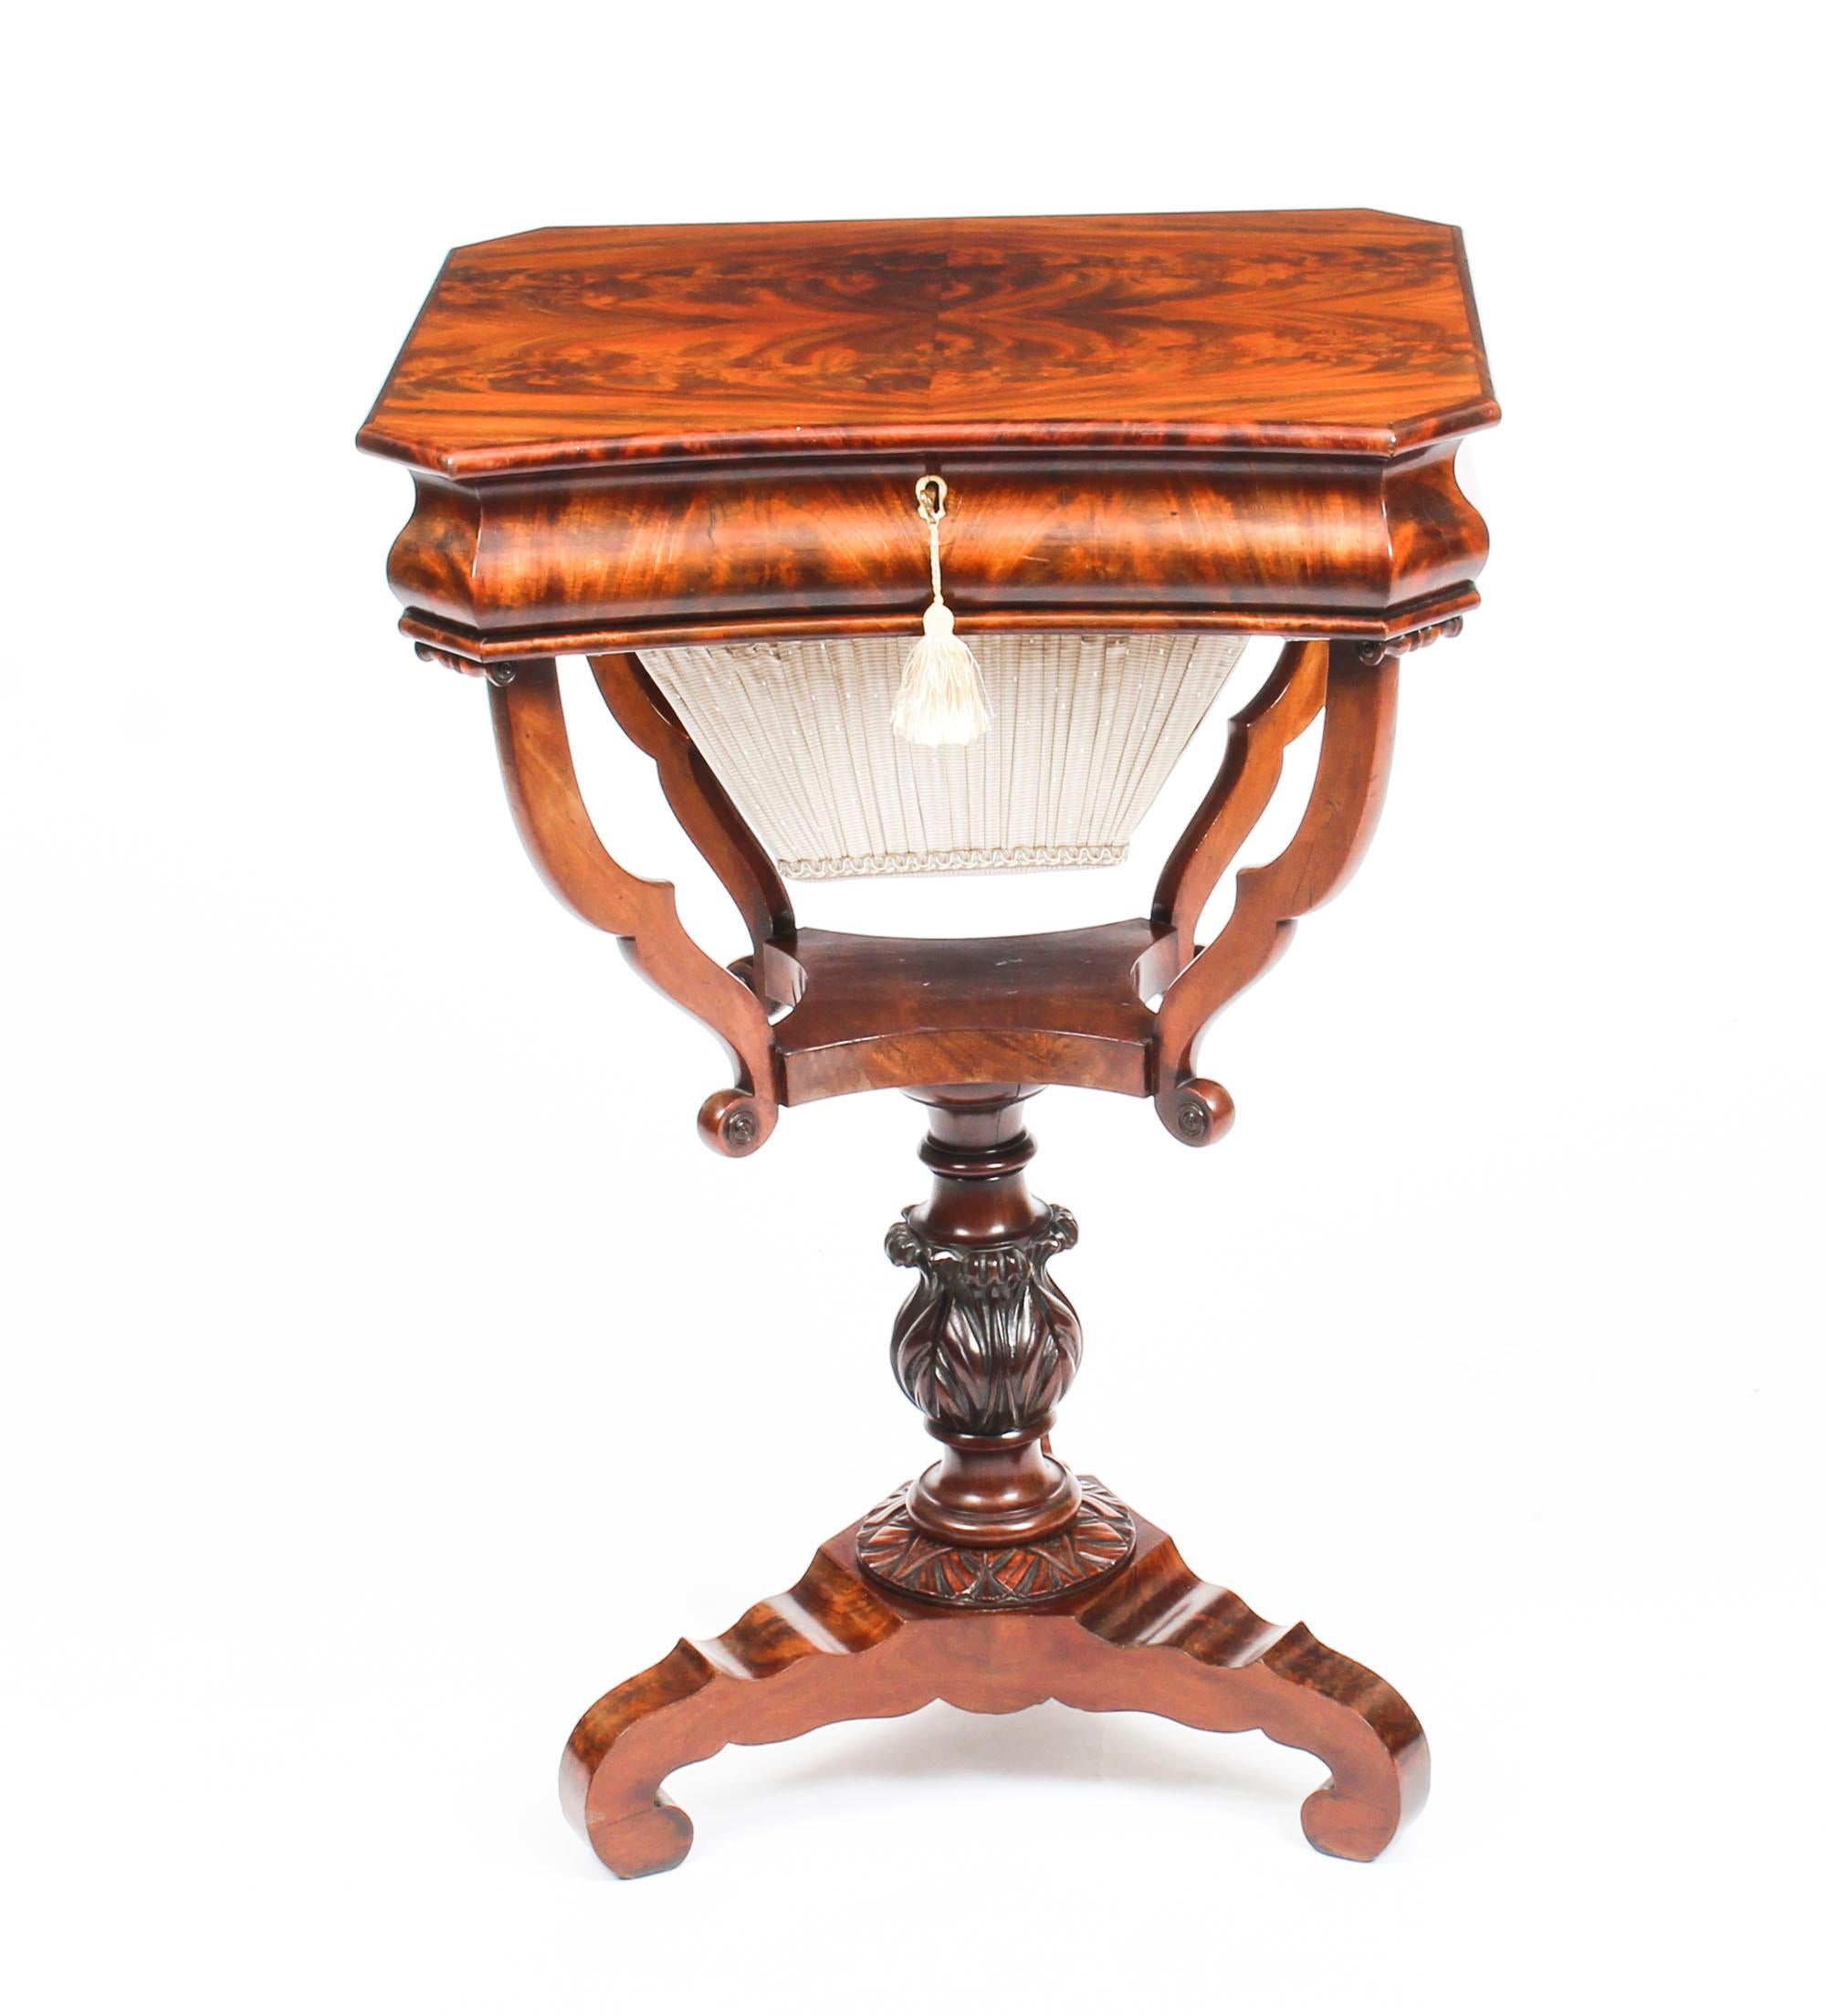 A beautiful antique English flame mahogany William IV work table, circa 1835 in date.

The hinged lid opens to reveal an interior fitted with various compartments some with fitted lids for your sewing items, a lift up pin cushion, a mirror and a